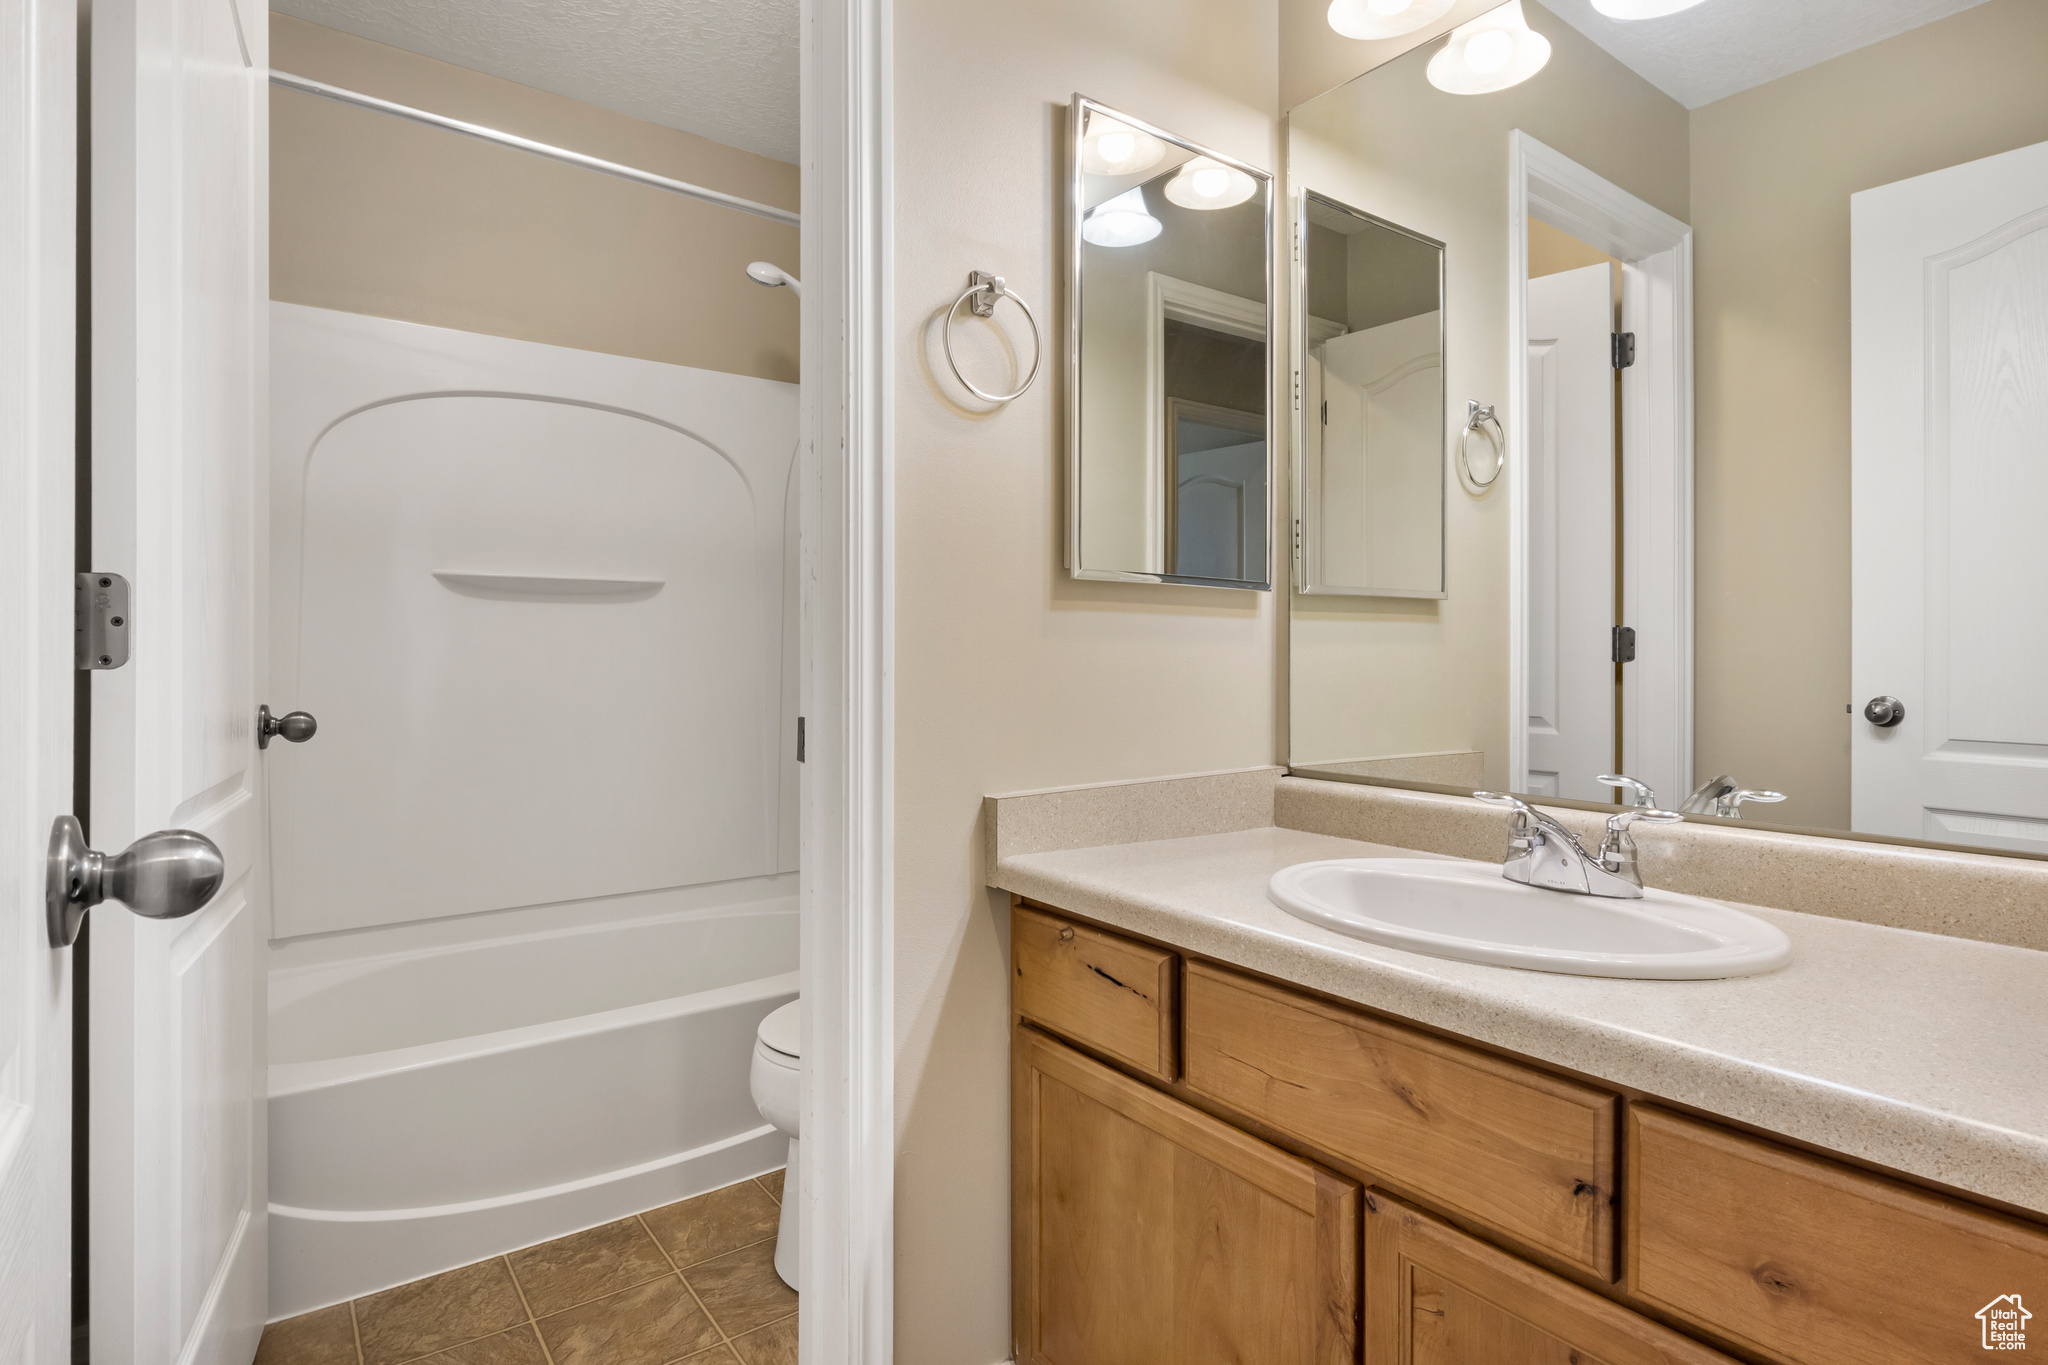 Full bathroom with shower / washtub combination, tile floors, vanity with extensive cabinet space, and toilet